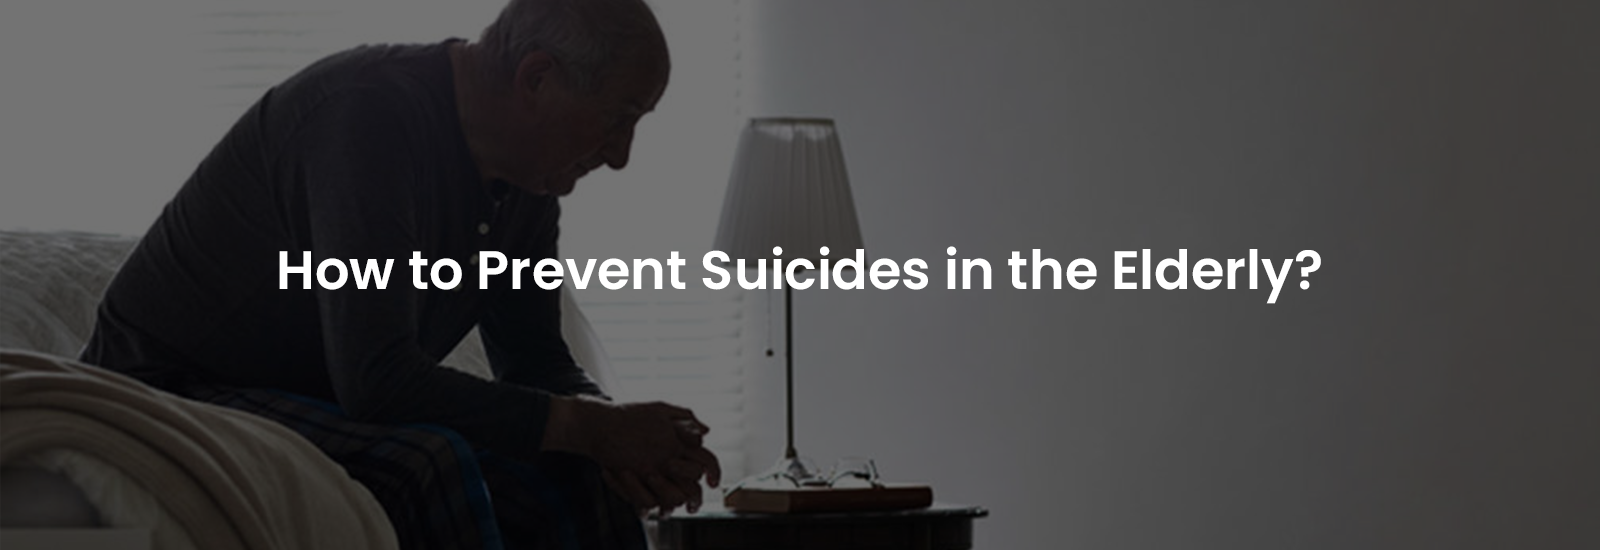 How to Prevent Suicides in the Elderly?